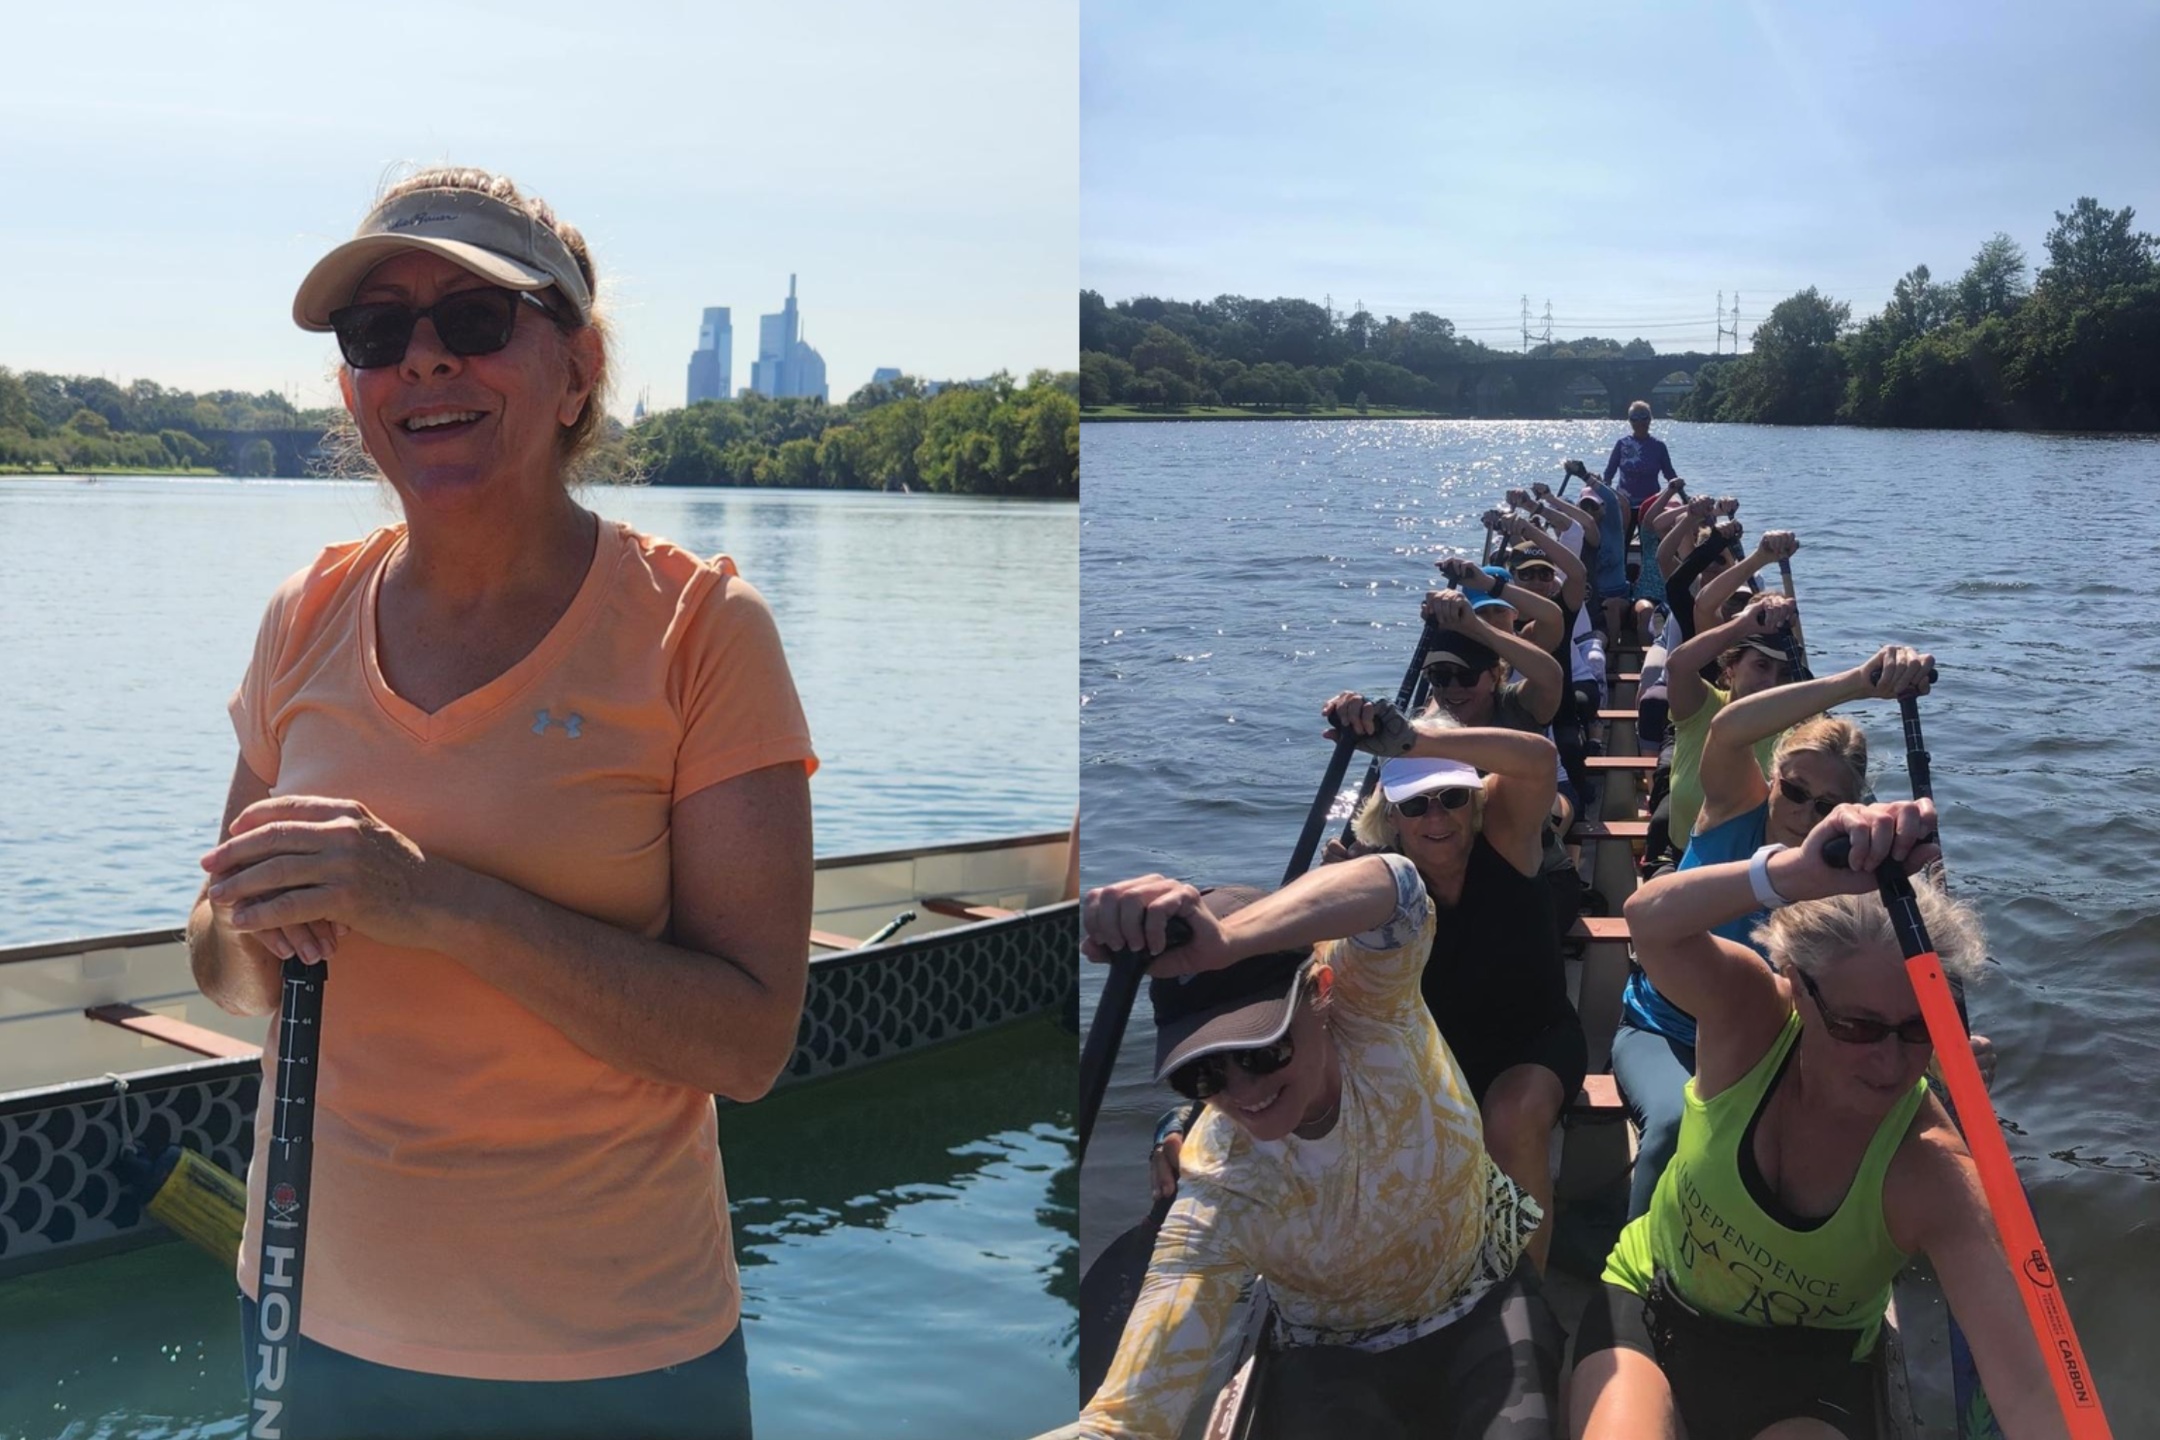 Philly rowers have embraced dragon boat racing on Schuylkill River